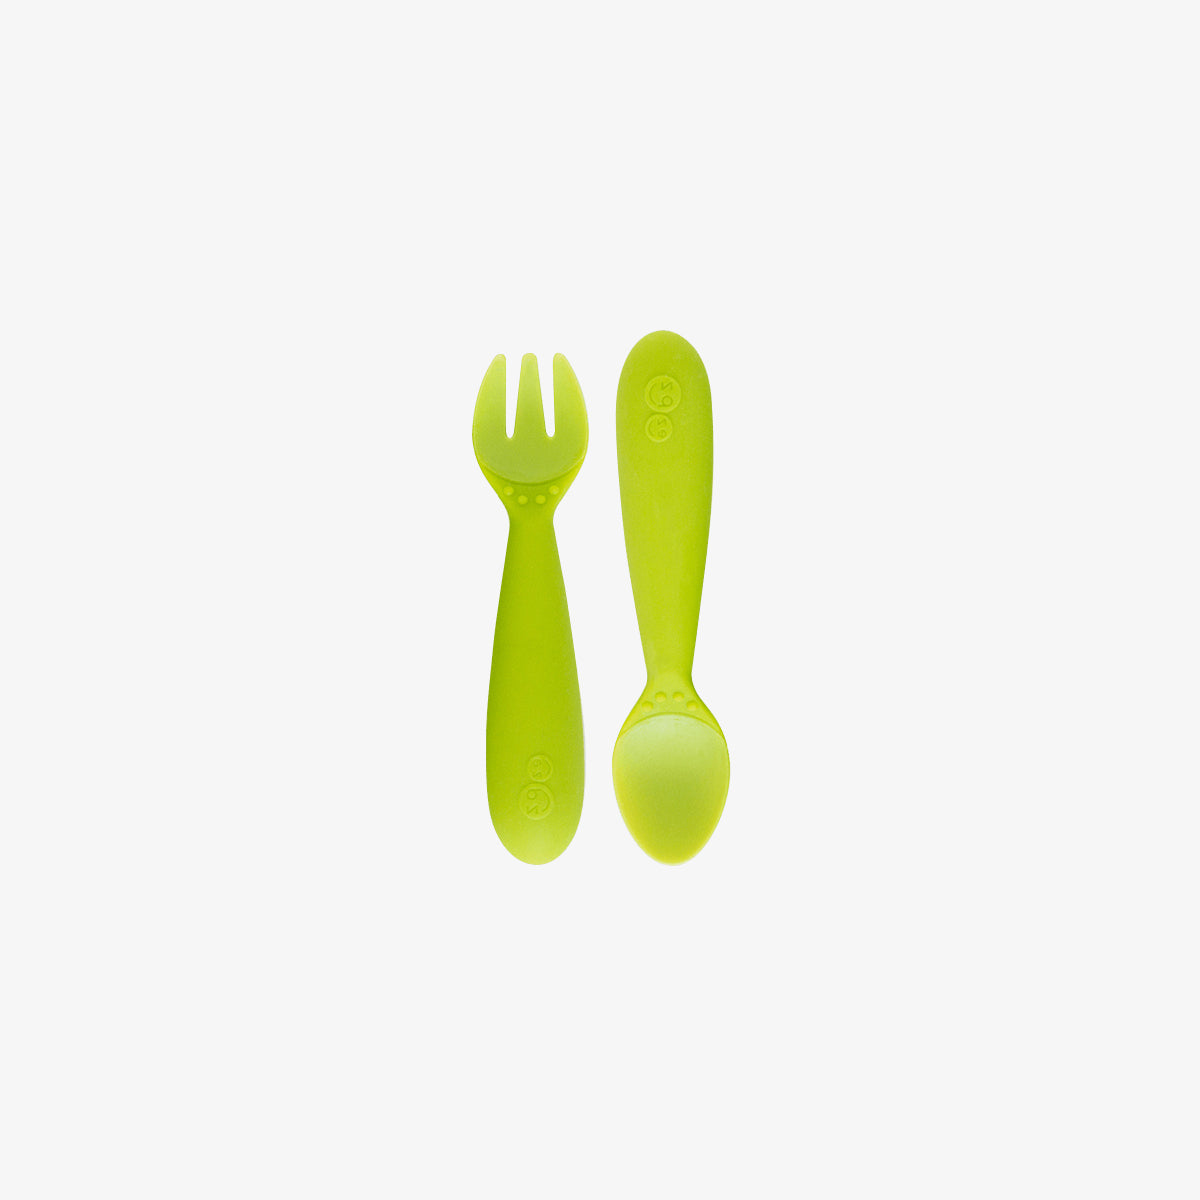 Mini Utensils in Lime by ezpz / Sensory Silicone Fork & Spoon for Toddlers